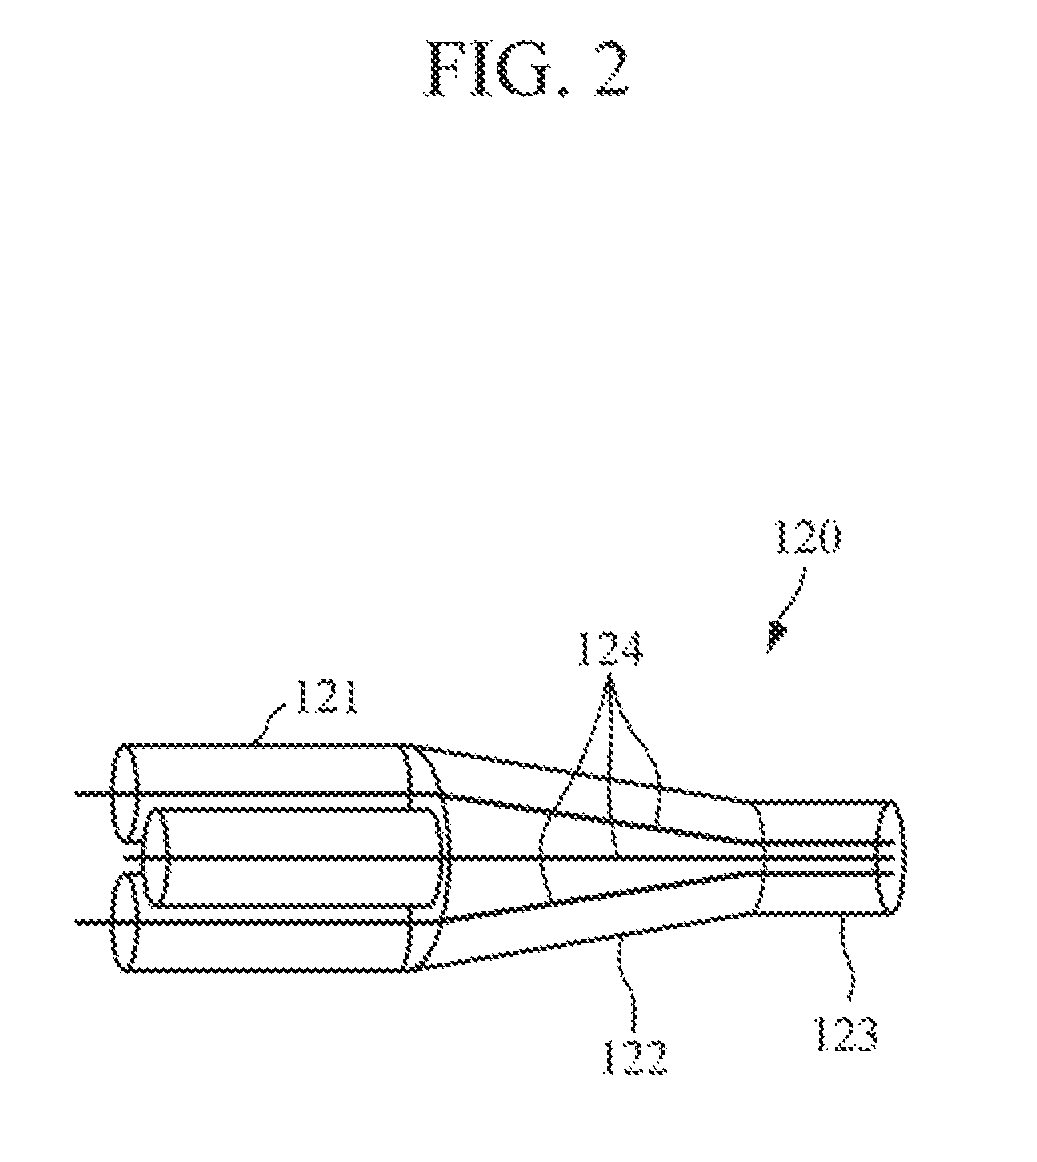 Mode division multiplexed passive optical network (MDM-PON) apparatus, and transmission and reception method using the same